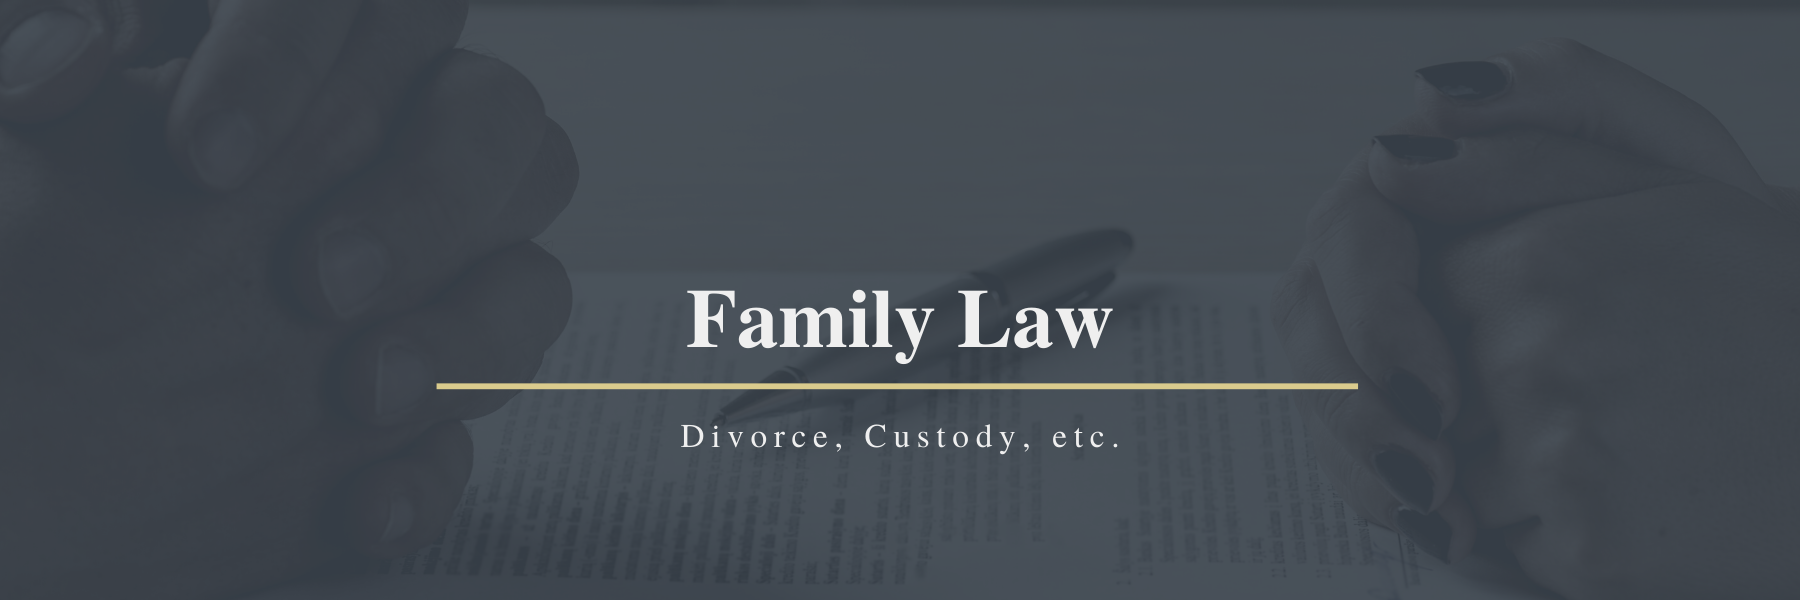 James B Justice Is A Oxford MS Divorce Lawyer Who Specializes In Family Law Amongst Other Areas